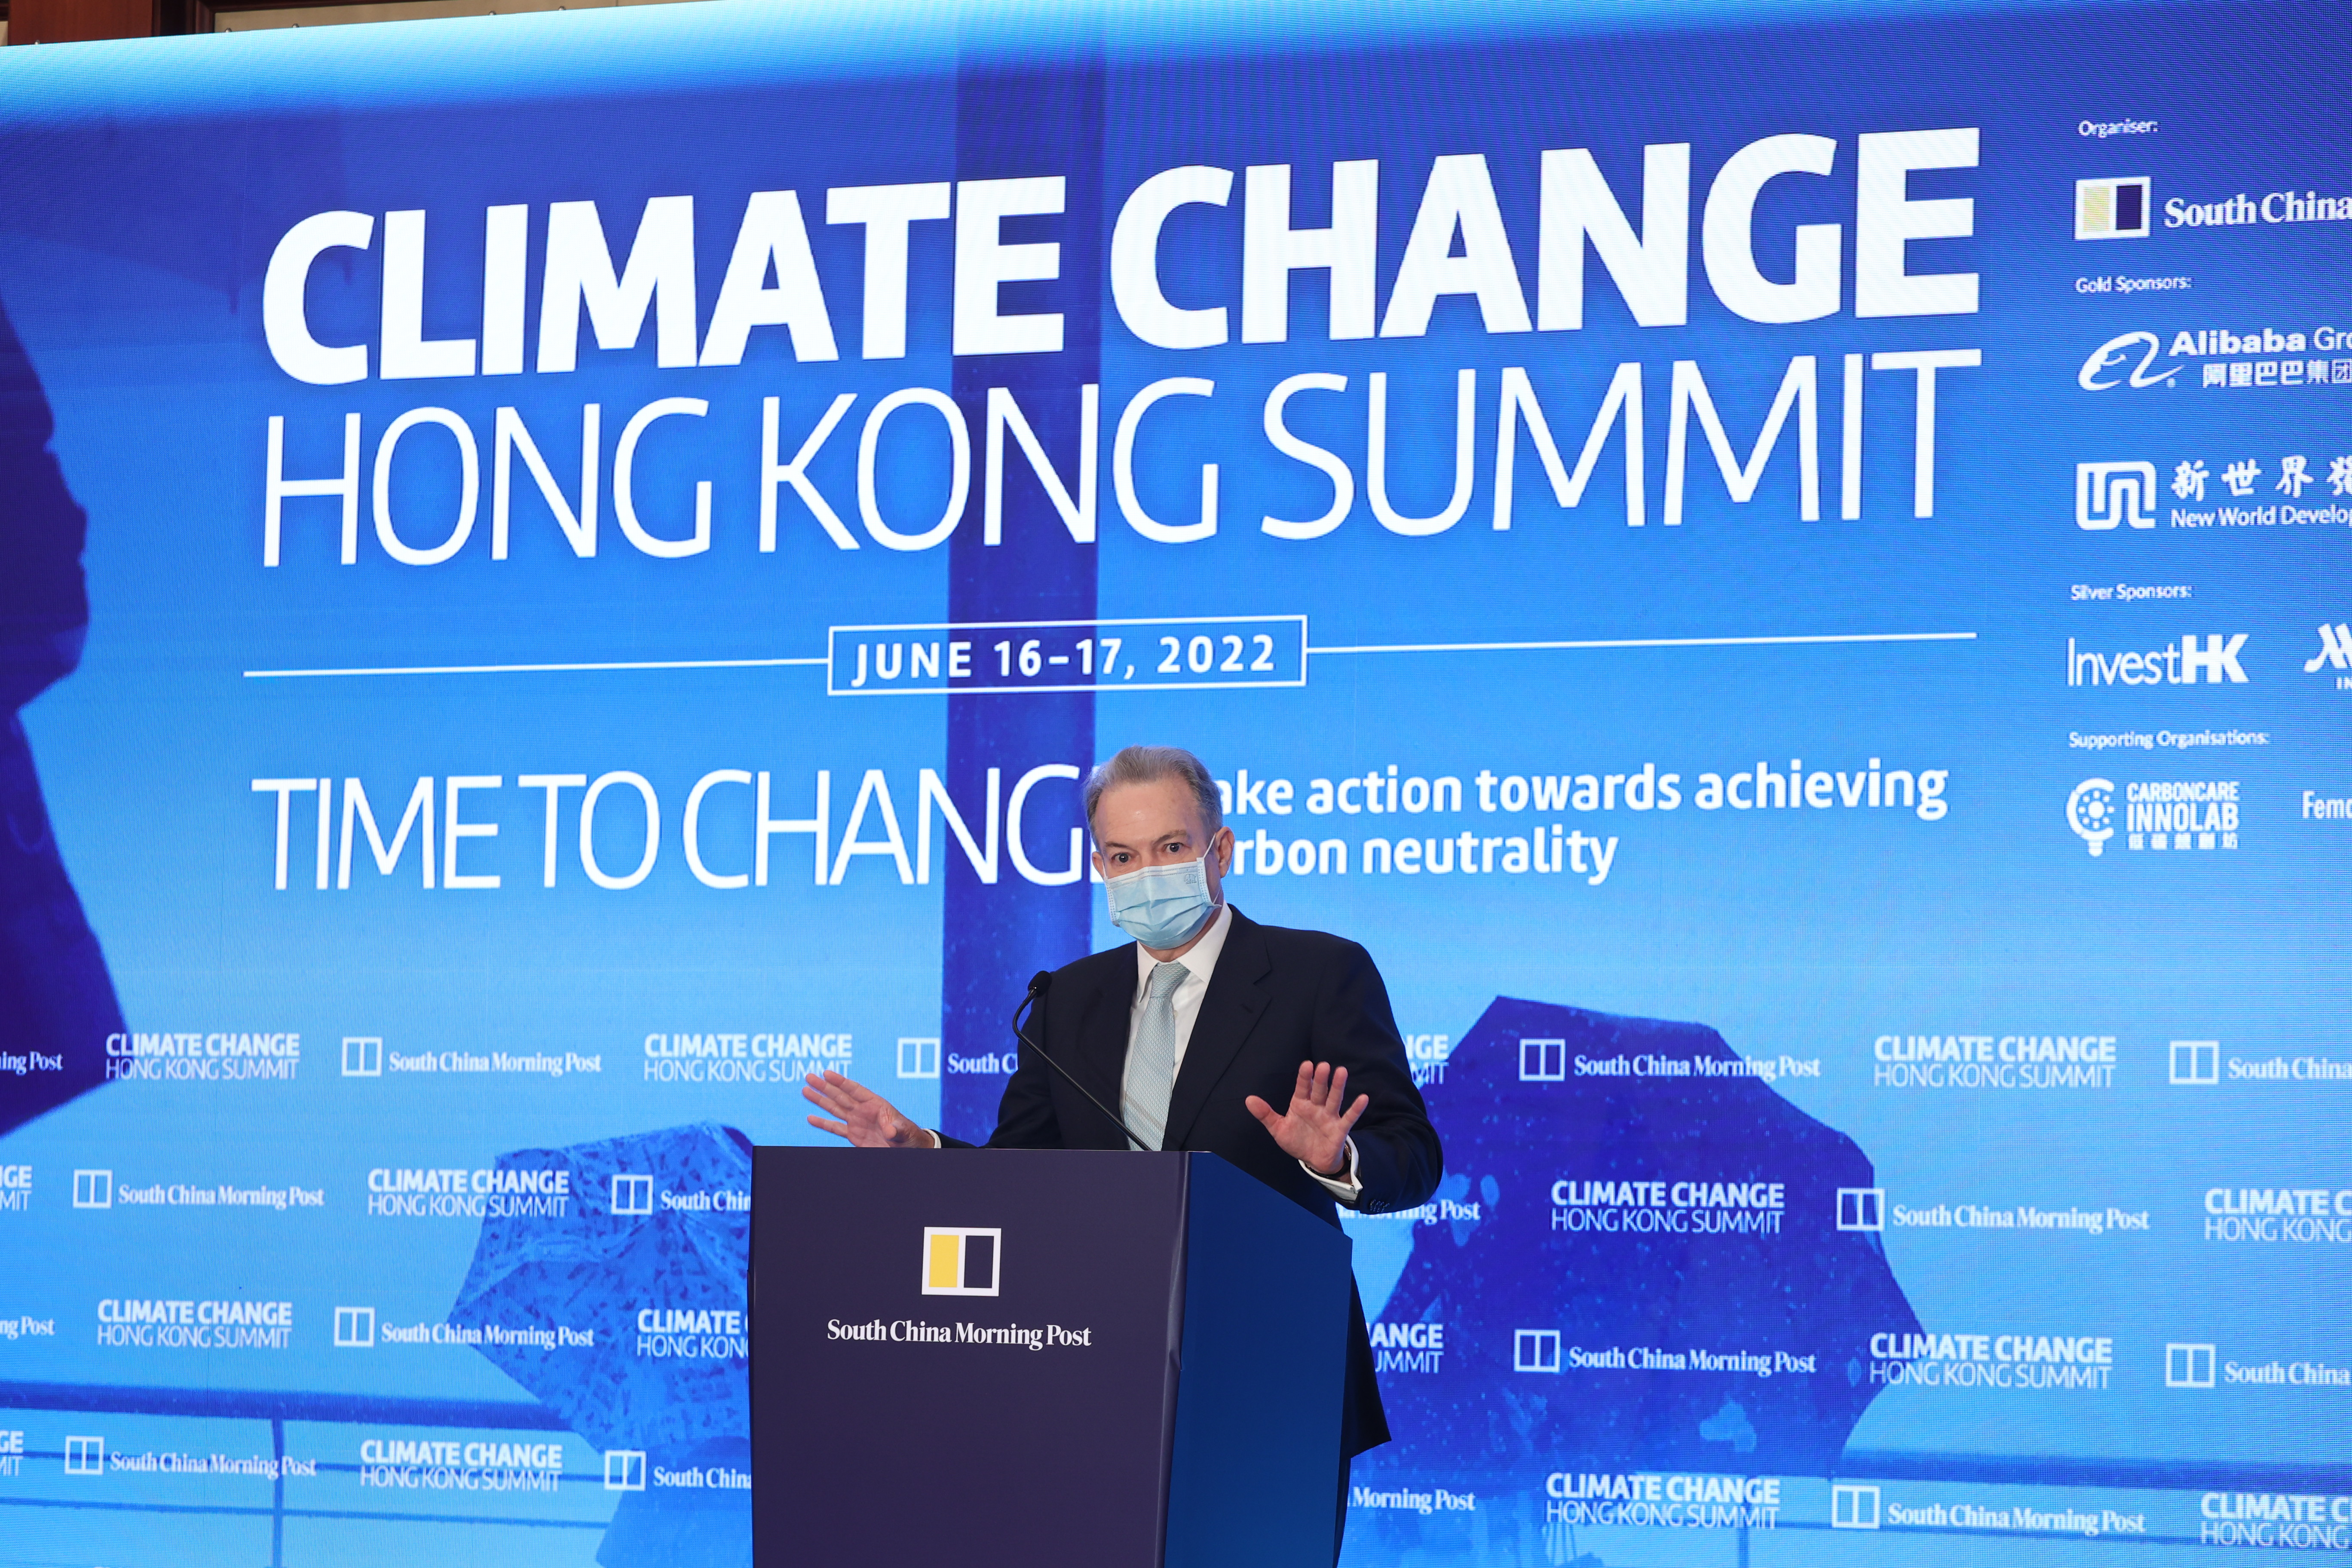 CLP Chief Executive Officer Richard Lancaster highlighted the key role of the electricity sector in Hong Kong’s transition to a carbon neutral economy at the SCMP Climate Change Summit in June